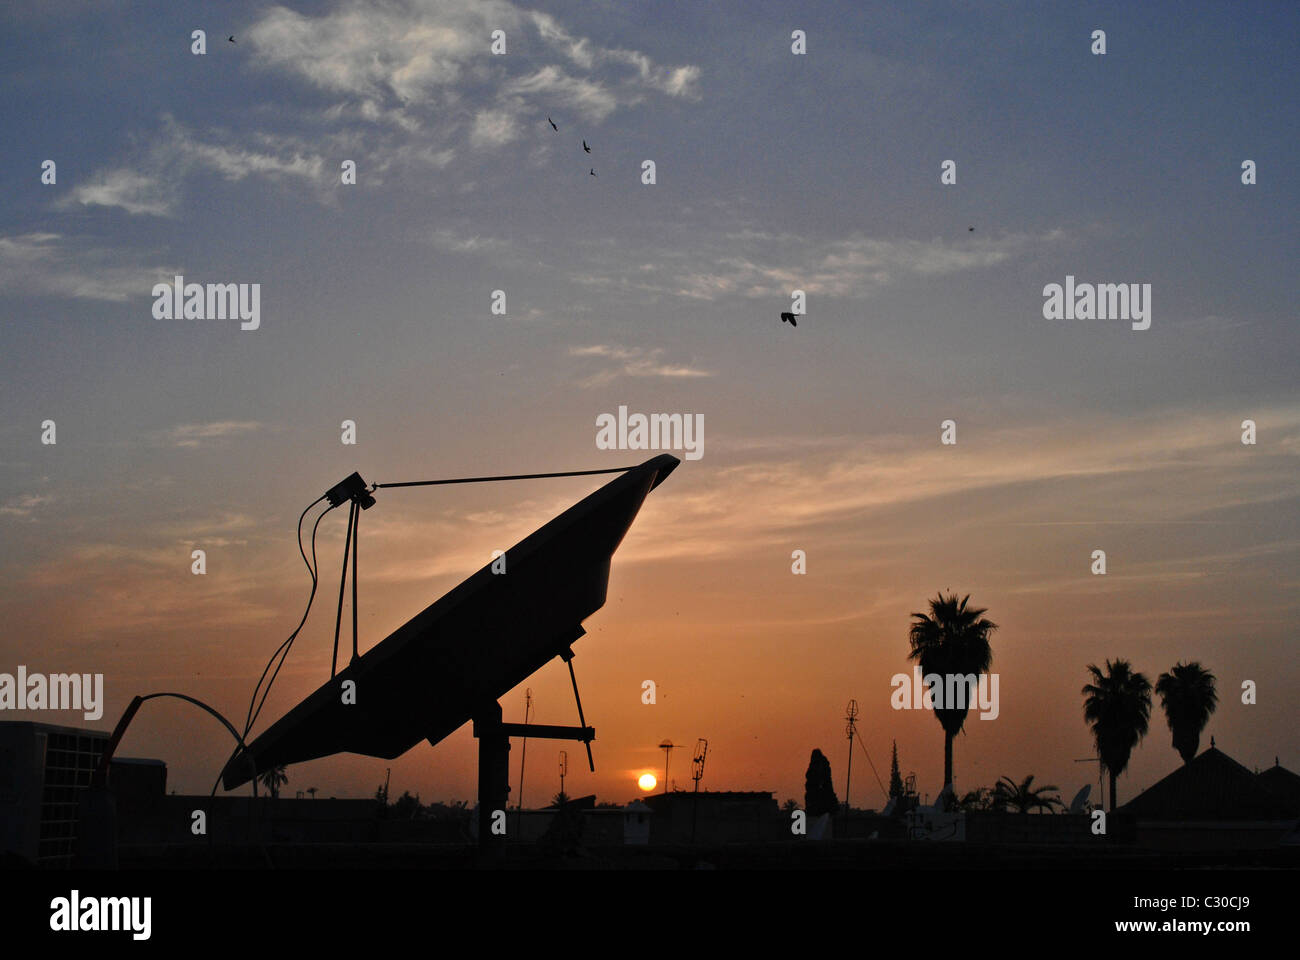 Satellite dish and palm trees at sunset, Morocco Stock Photo